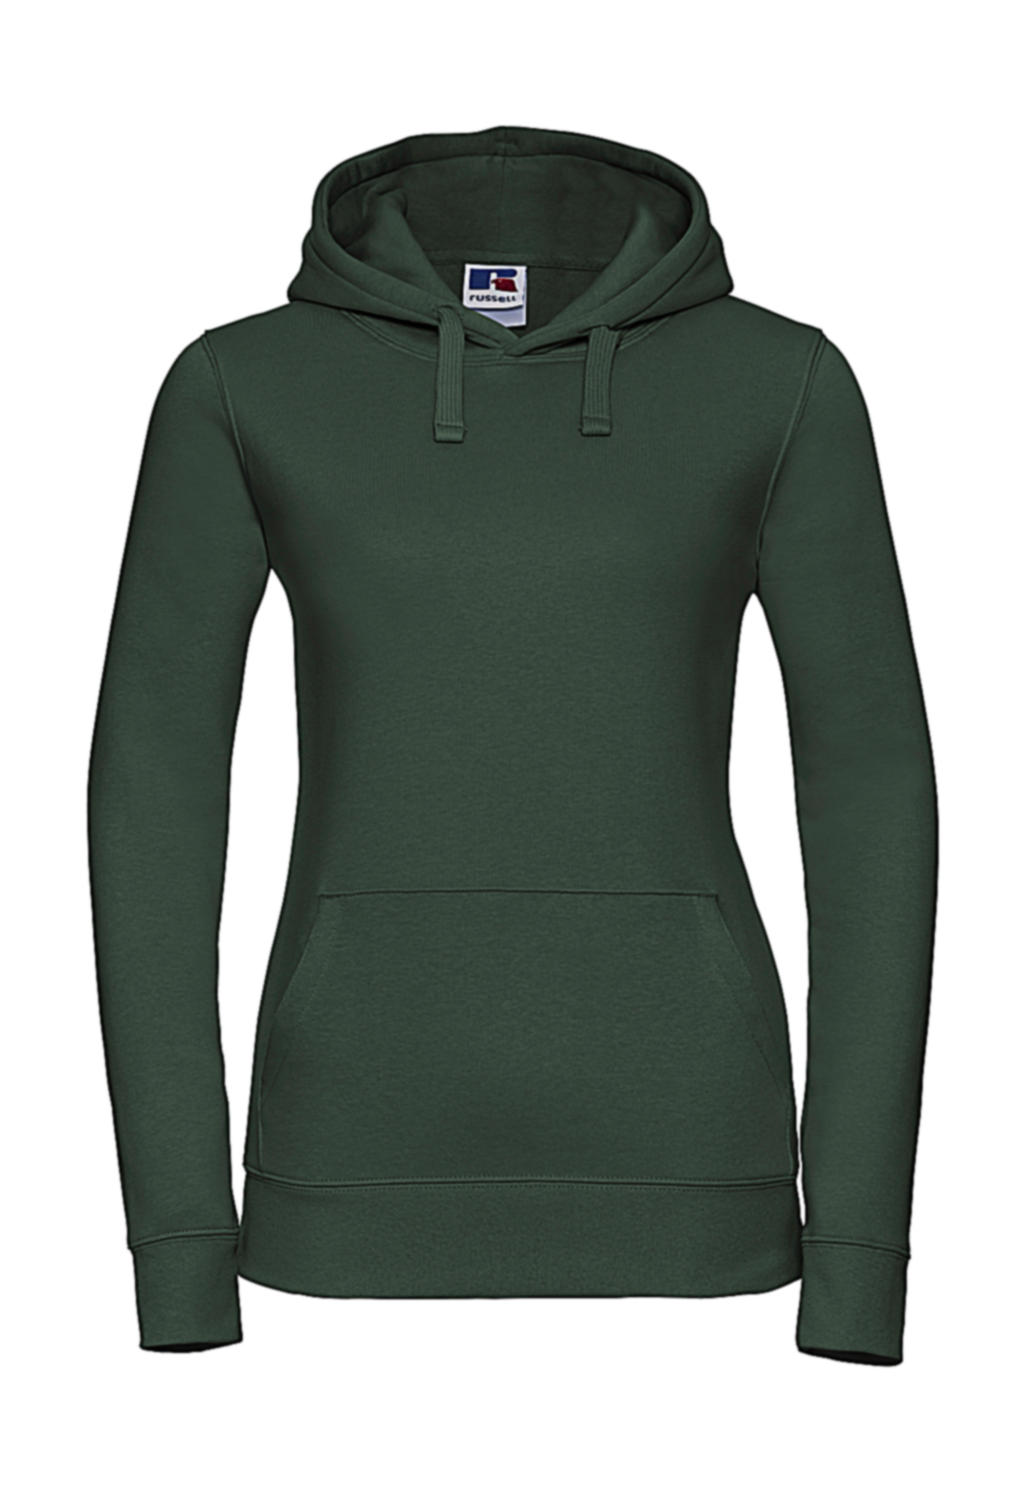  Ladies Authentic Hooded Sweat in Farbe Bottle Green